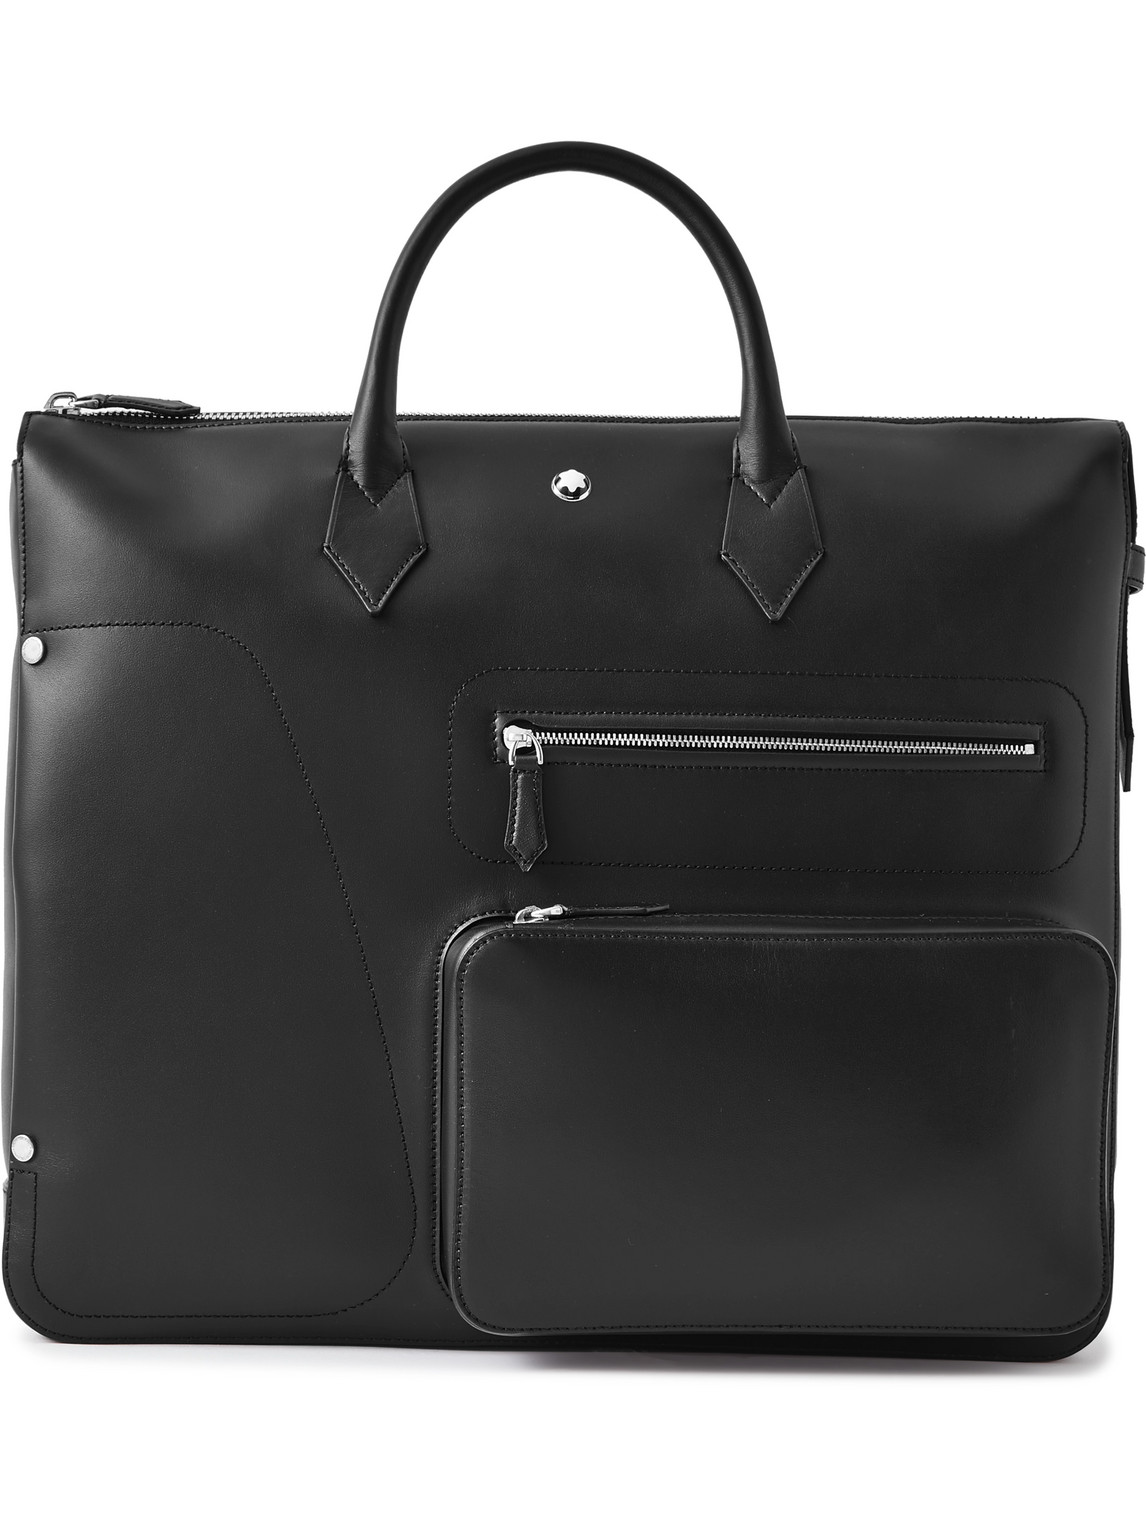 MONTBLANC MEISTERSTÜCK SELECTION SOFT 24/7 LEATHER BRIEFCASE